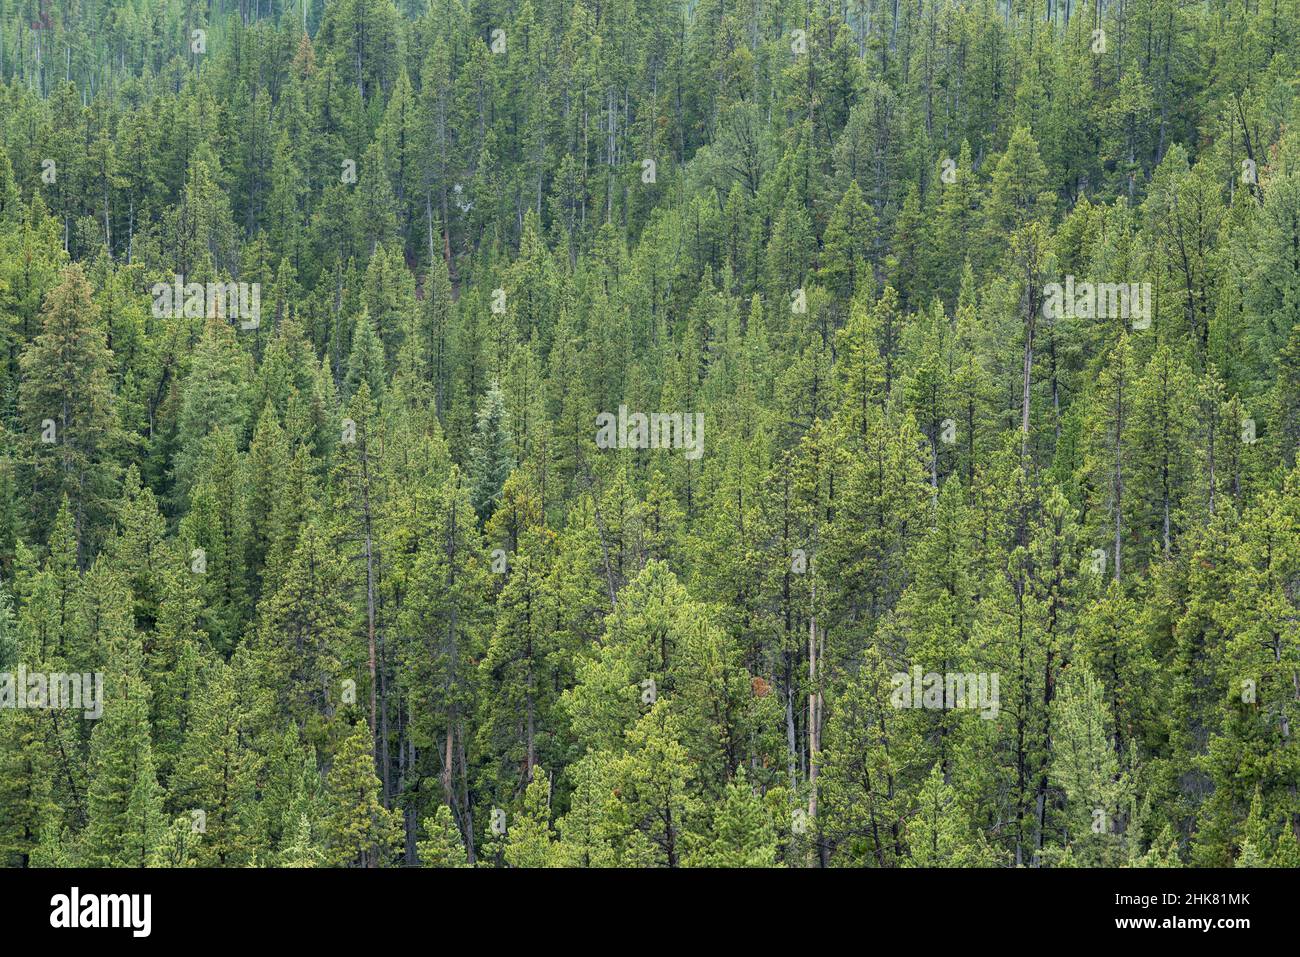 Lodgepole Pine Forest, Virginia Cascades Drive, Yellowstone National Park, Wyoming. Stockfoto